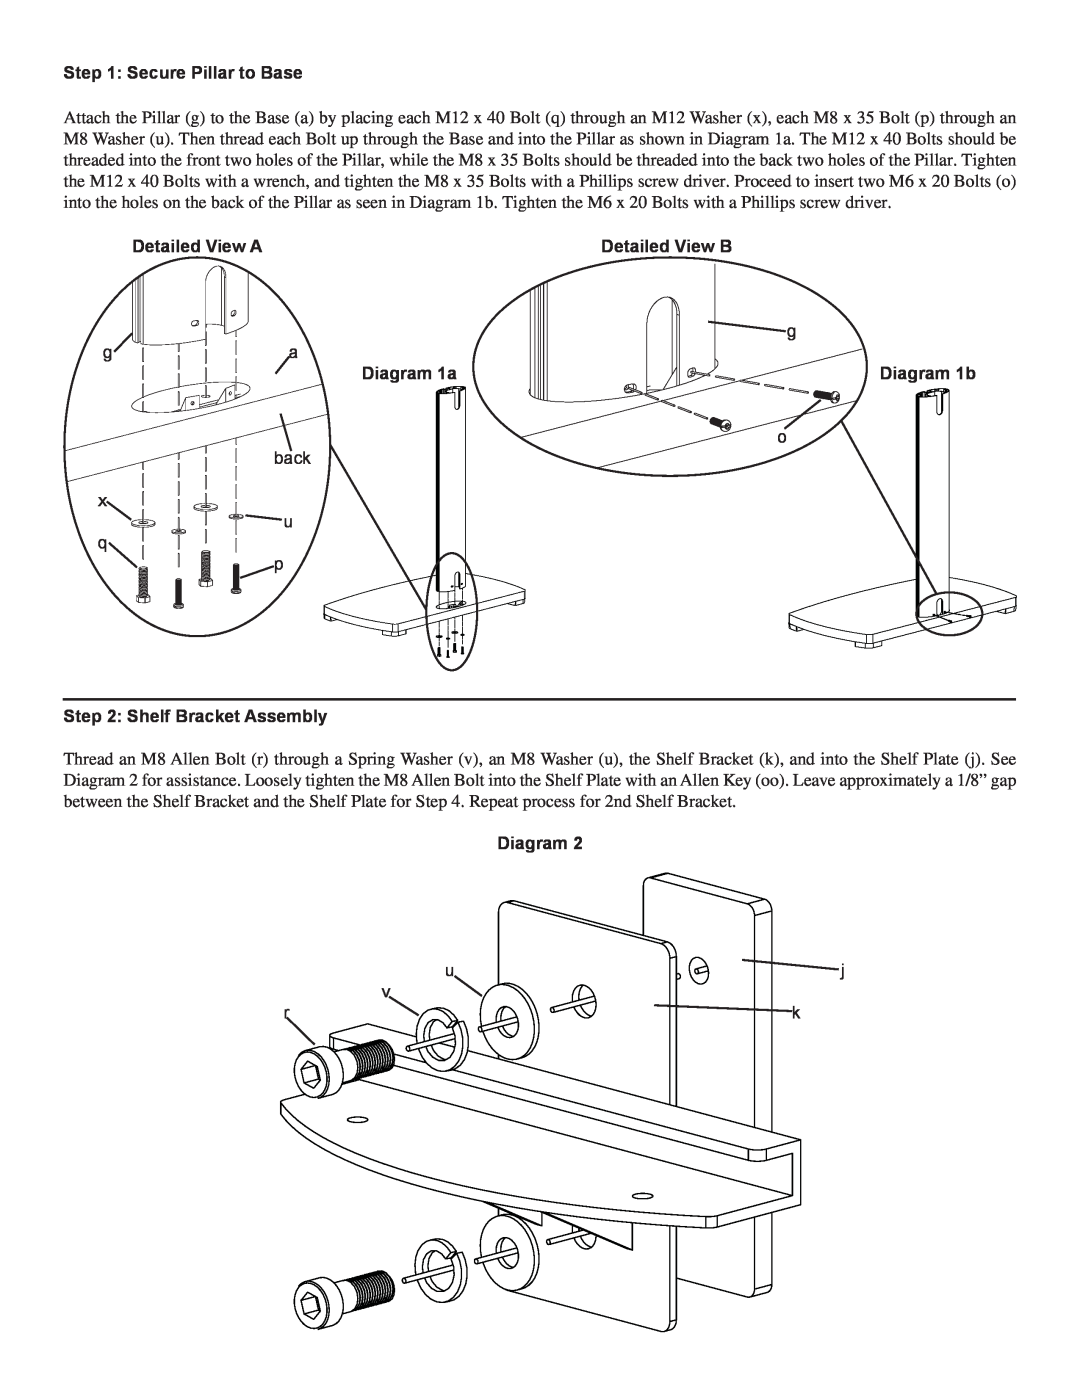 Sanus Systems PFFP2 manual Secure Pillar to Base, Detailed View A, Detailed View B, Diagram 1a, Shelf Bracket Assembly 